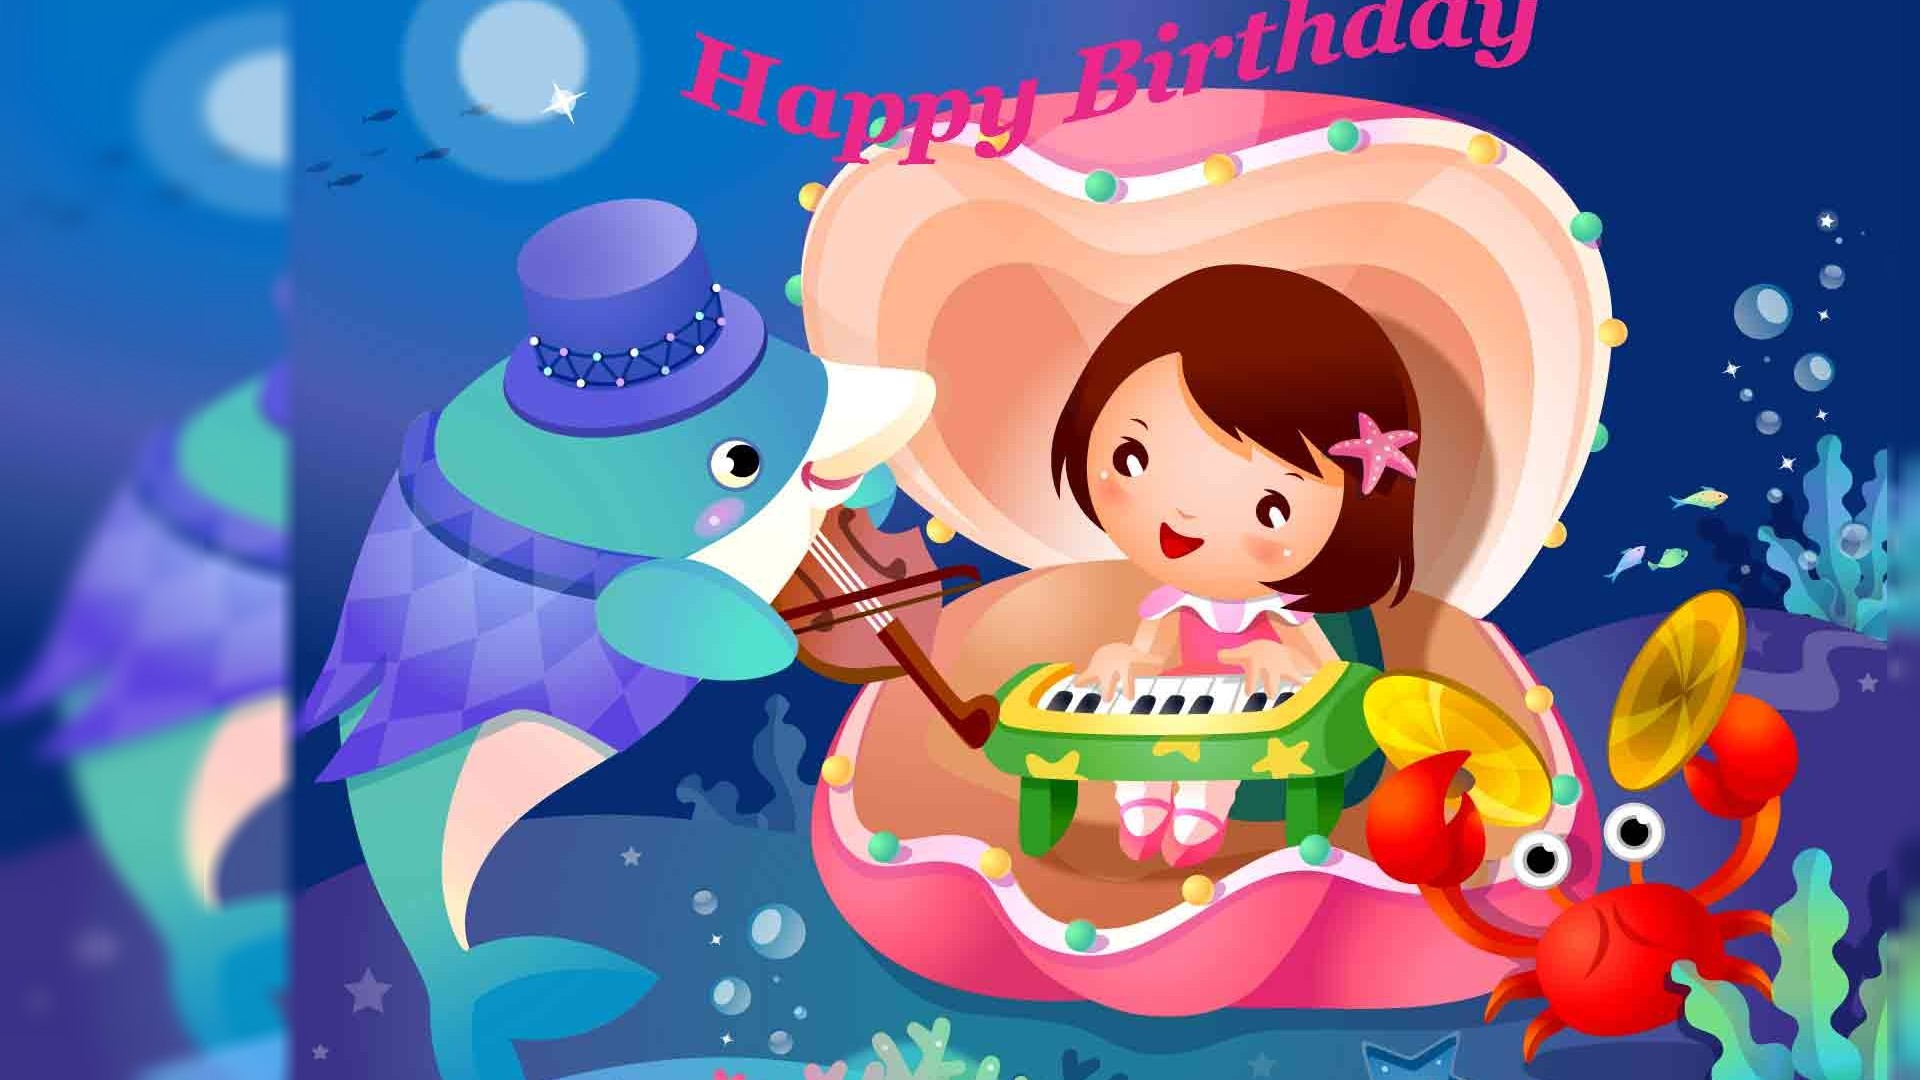 Cute Animated Happy Birthday Hd Wallpapers Free Download - Mau Tranh Tuong Mam Non Dep - HD Wallpaper 